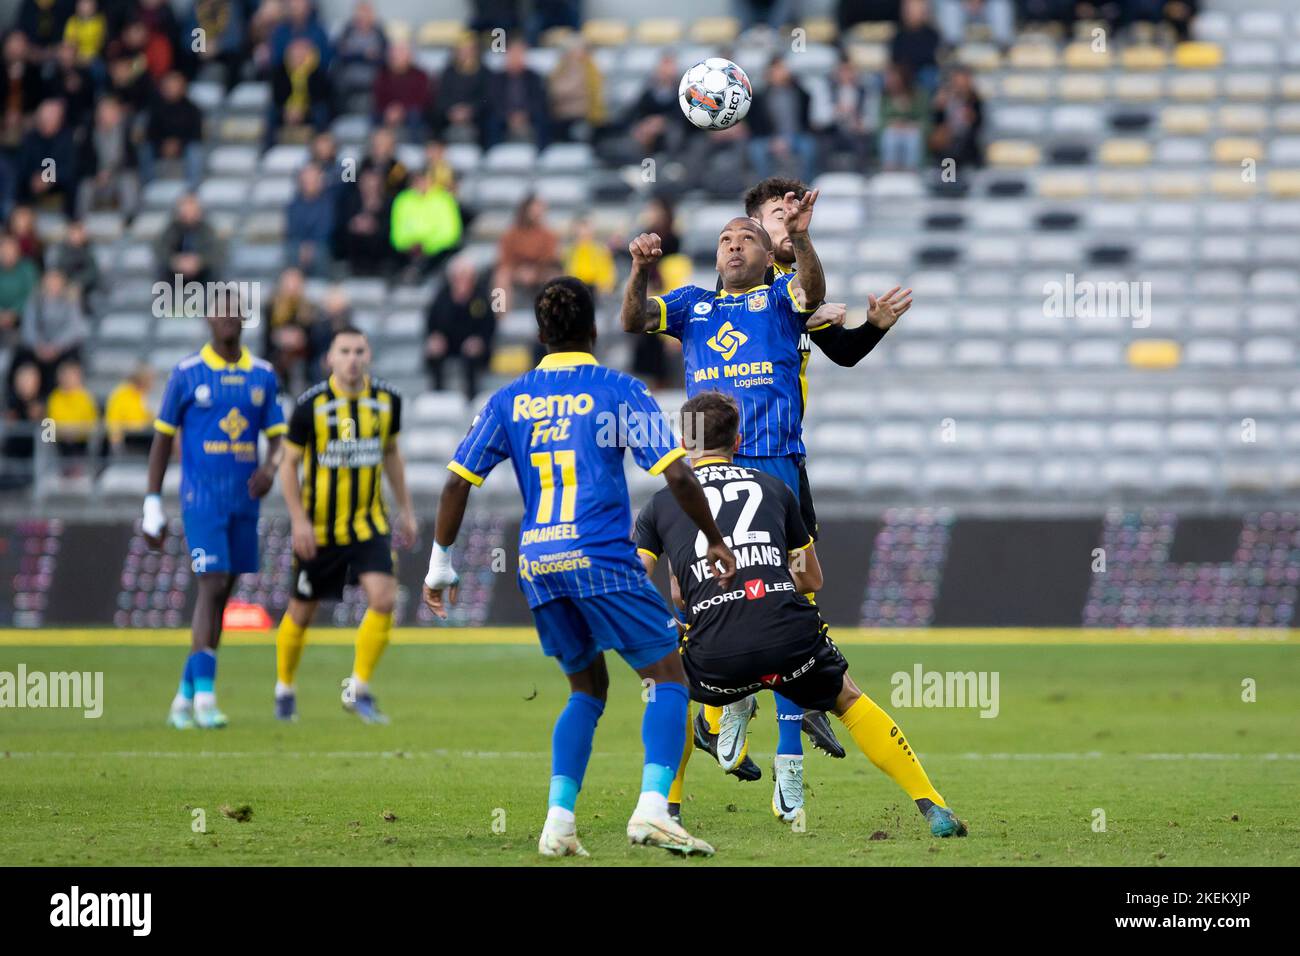 Beveren's Luiz Everton and Lierse's Brent Laes pictured in action during a soccer match between Lierse Kempenzonen and SK Beveren, Sunday 13 November 2022 in Lier, on day 13 of the 2022-2023 'Challenger Pro League' 1B second division of the Belgian championship. BELGA PHOTO KRISTOF VAN ACCOM Stock Photo